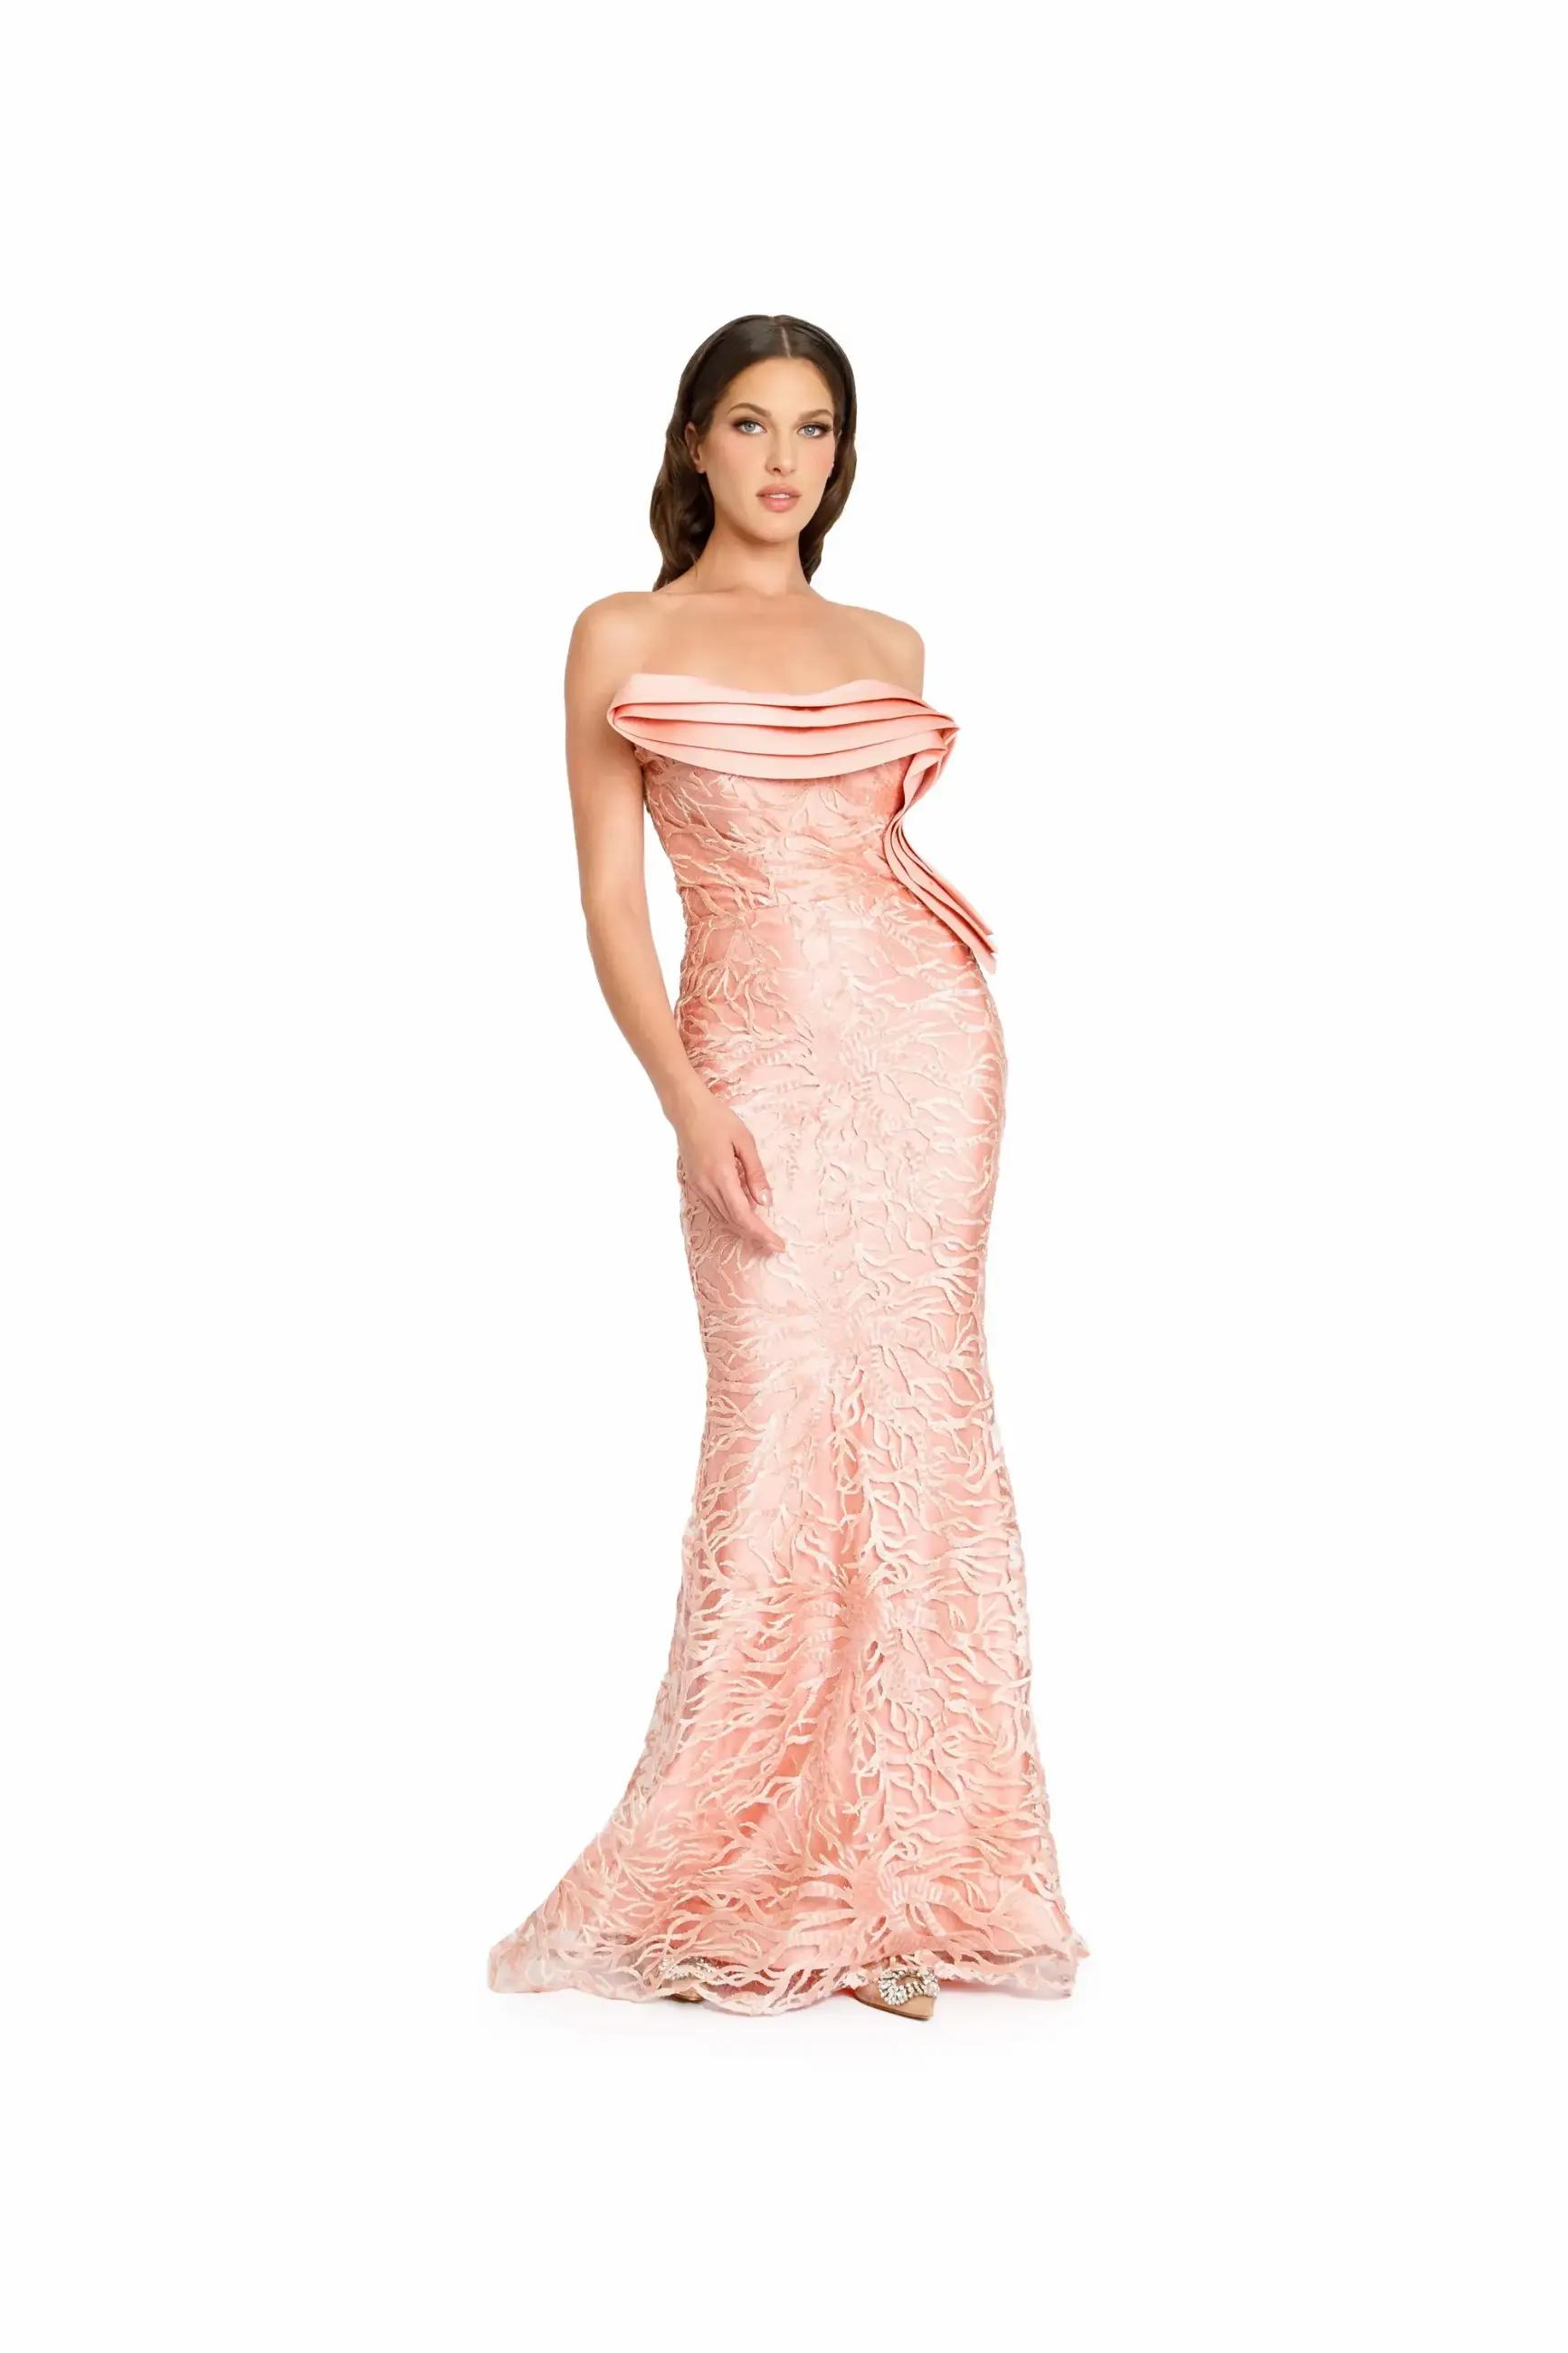 Model wearing a pink evening gown